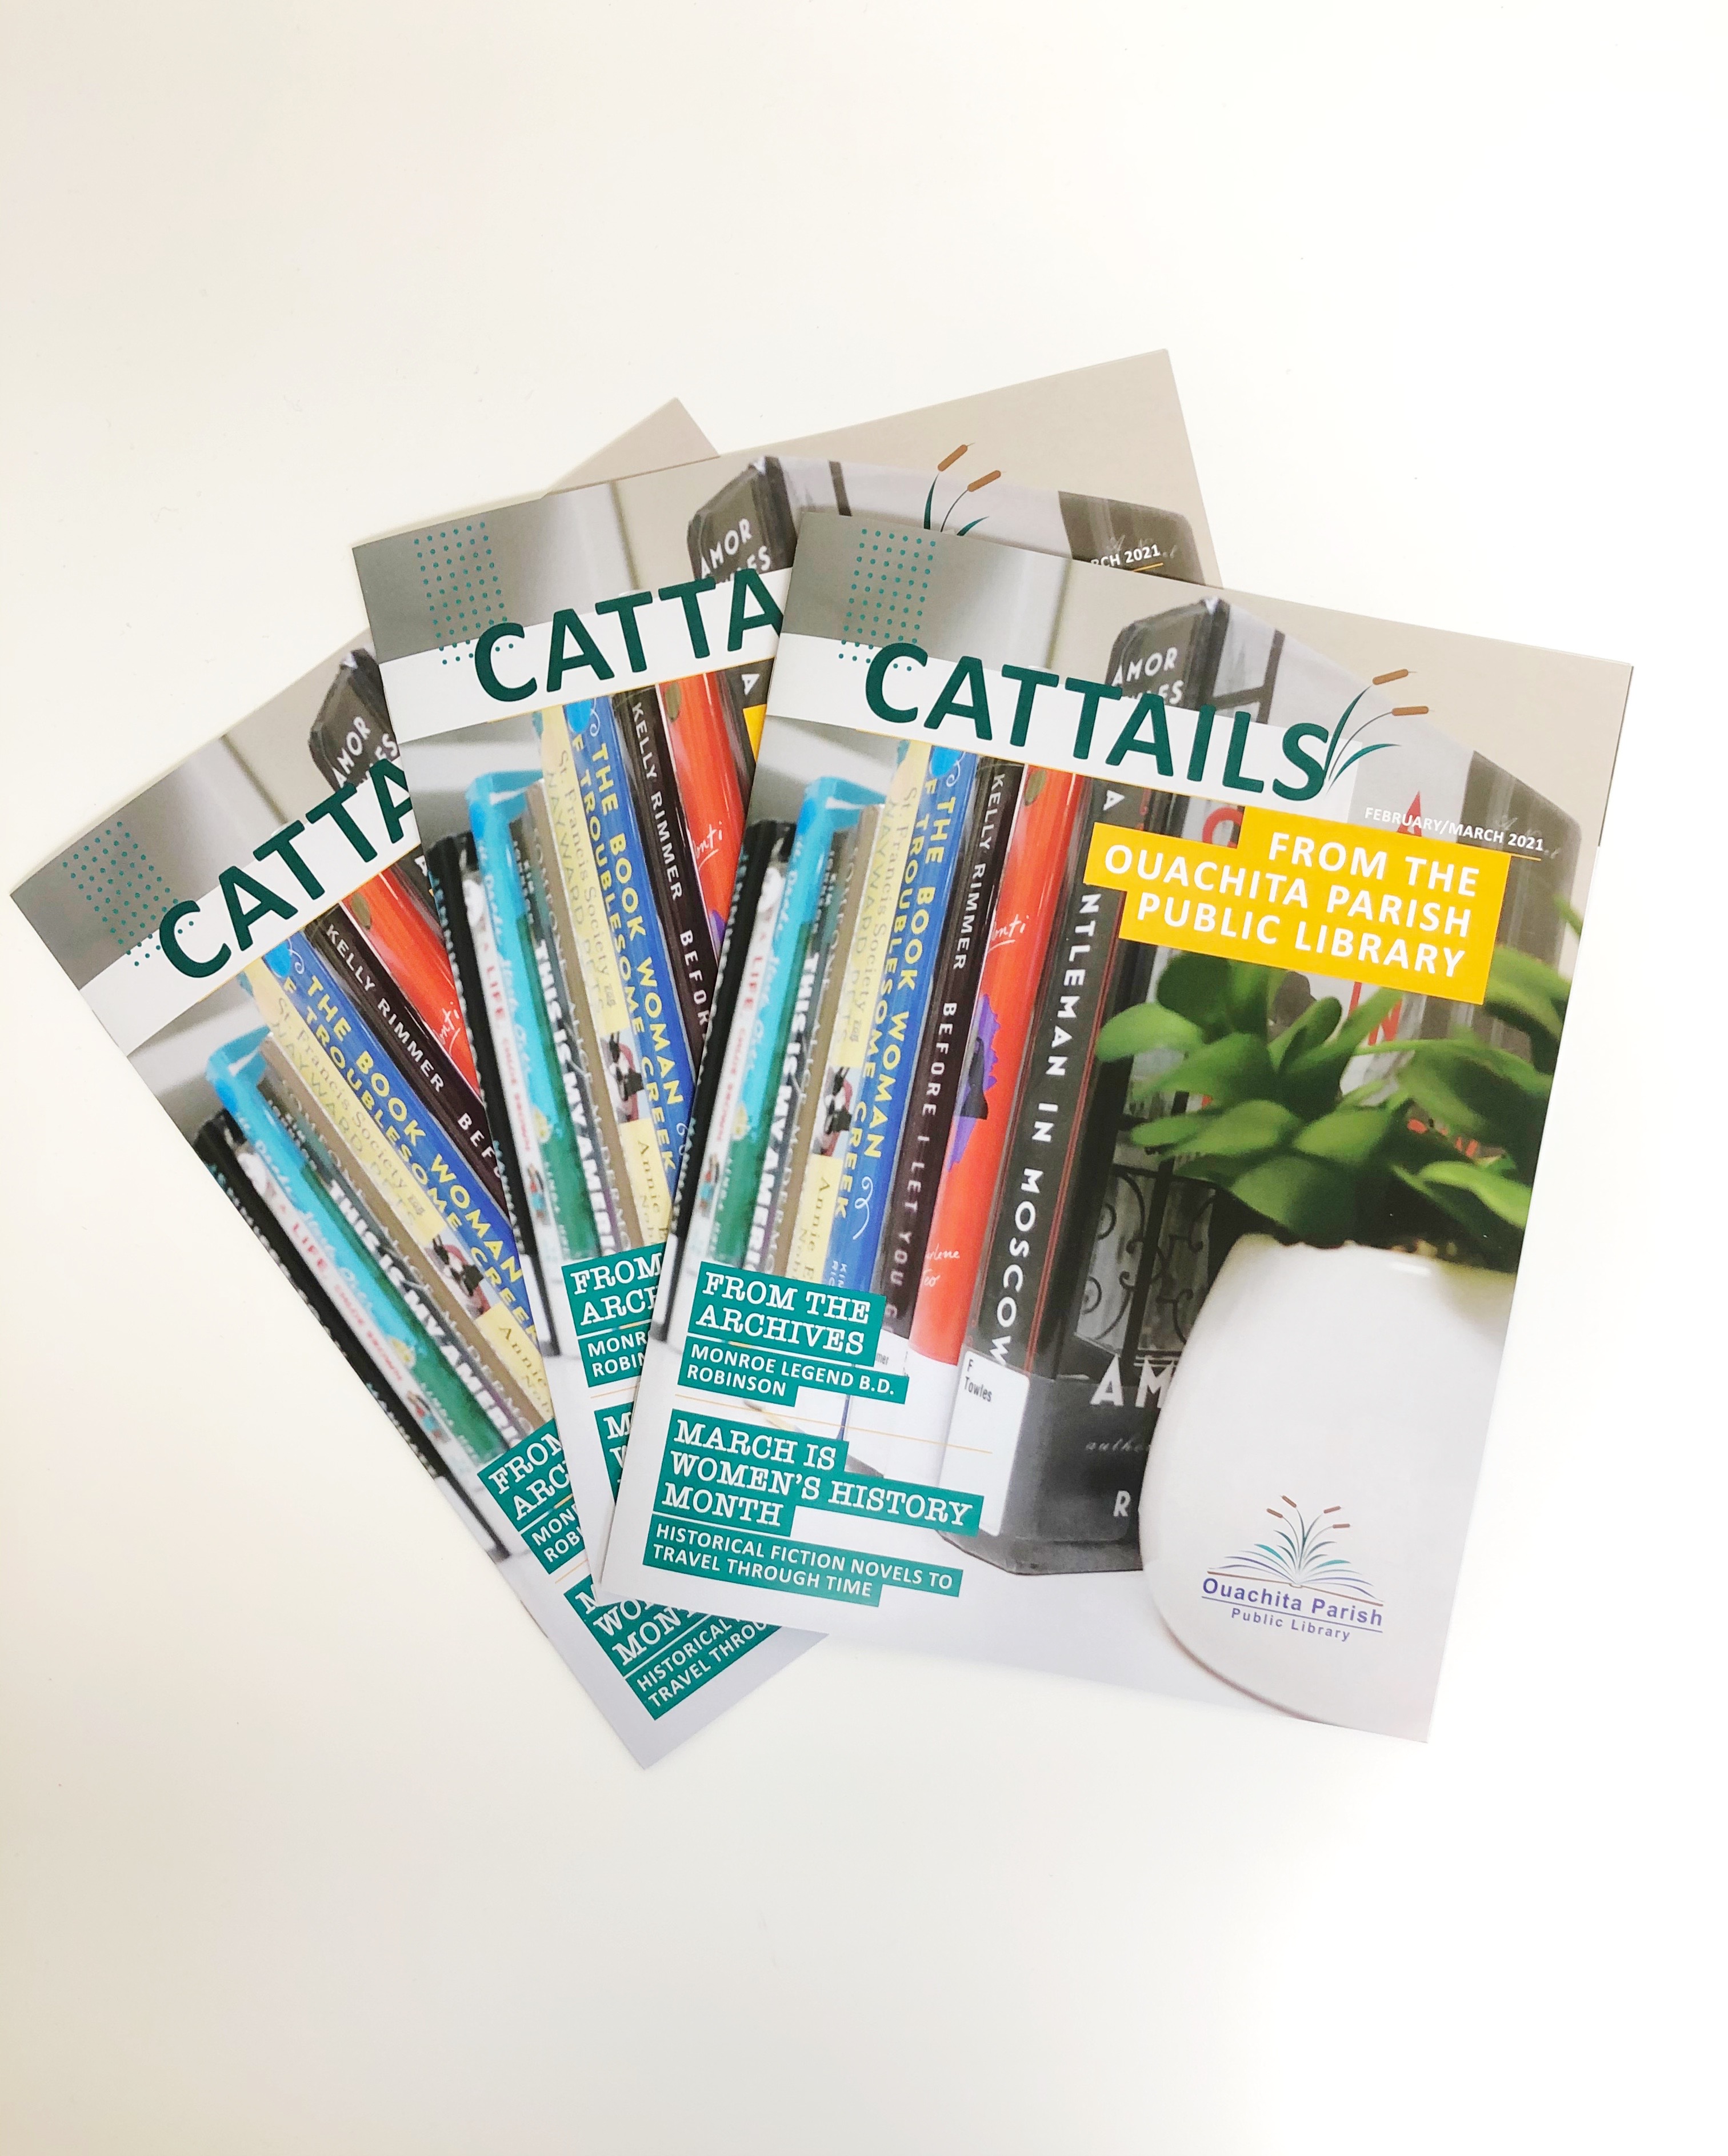 three issues of the February/March Cattails newsletter lay on a white table